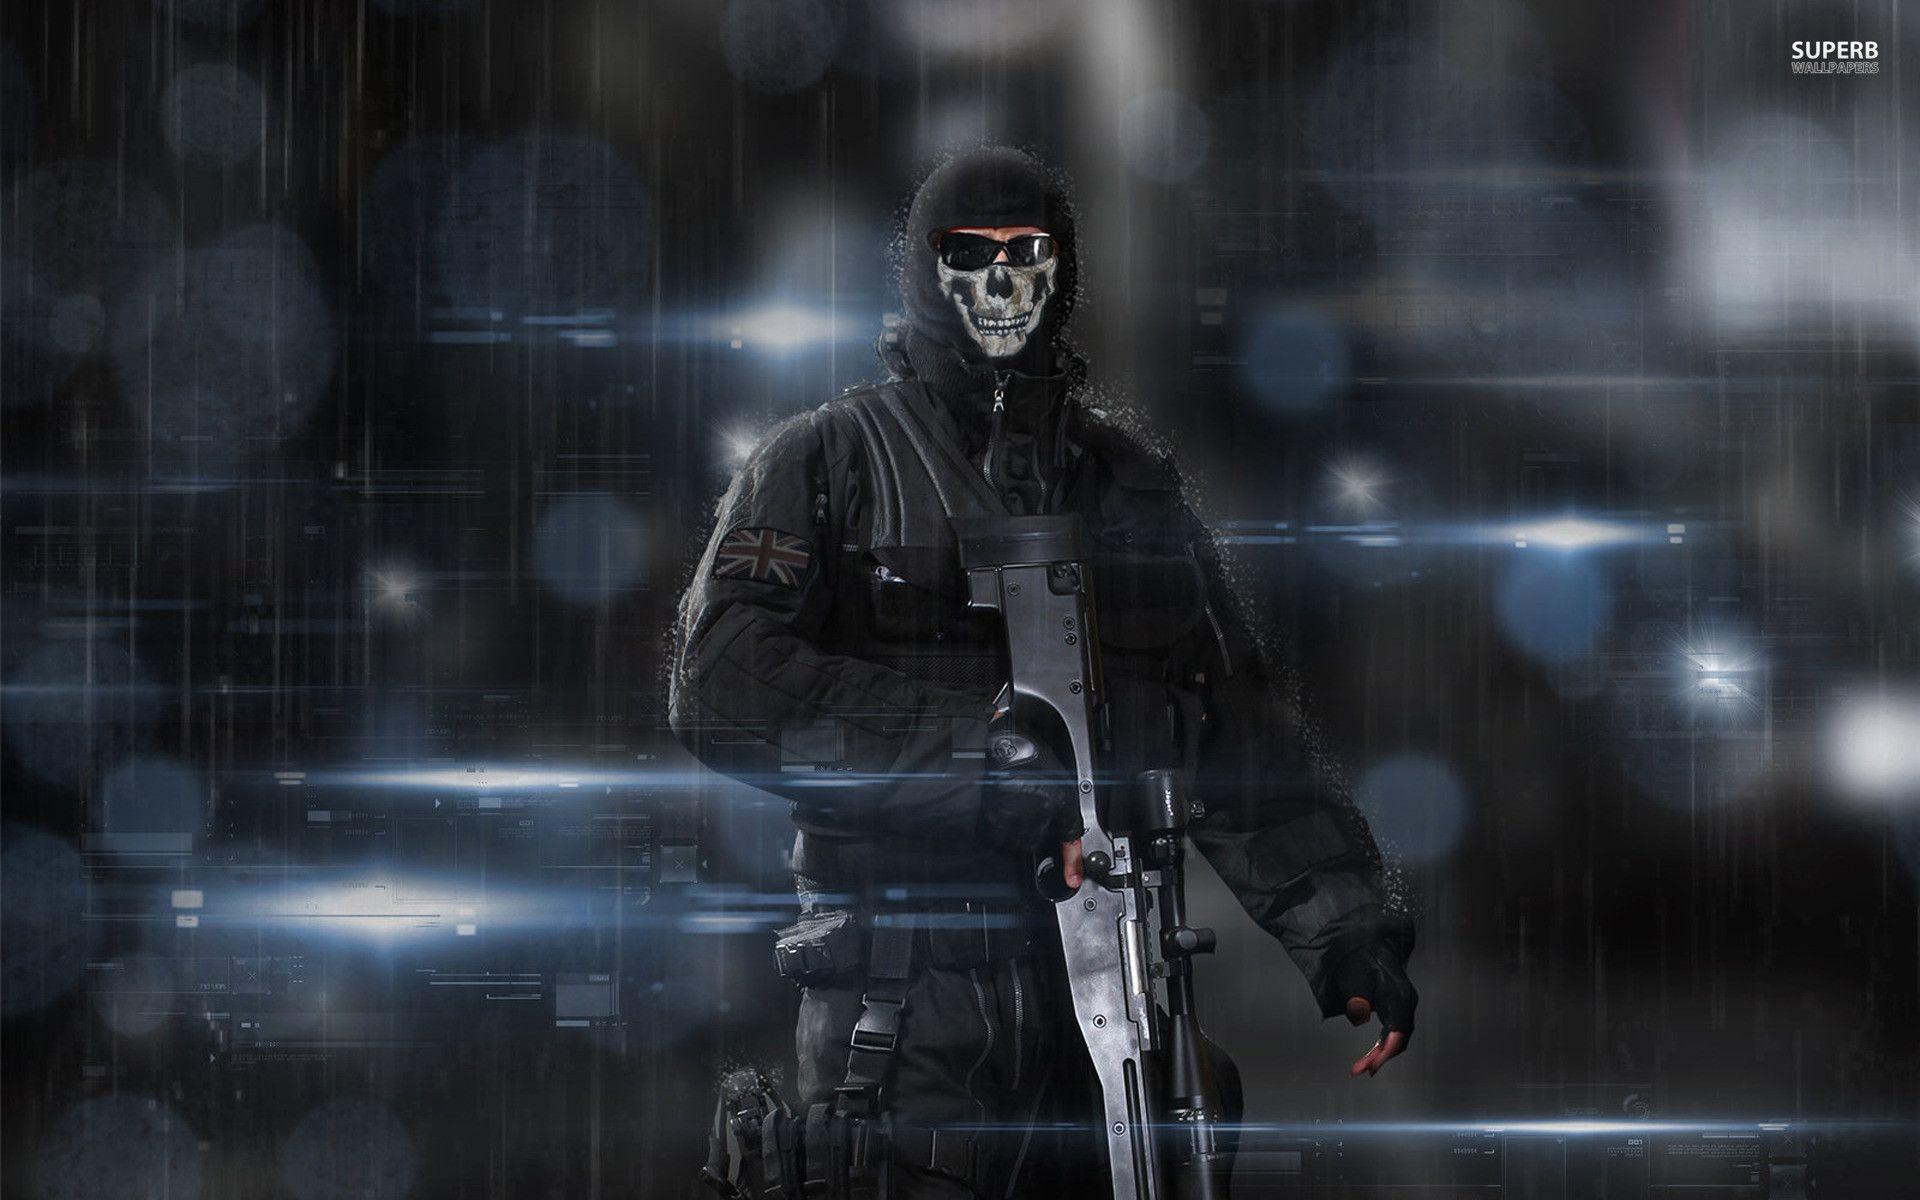 Call Of Duty Ghost Snipers Wallpapers Wallpaper Cave